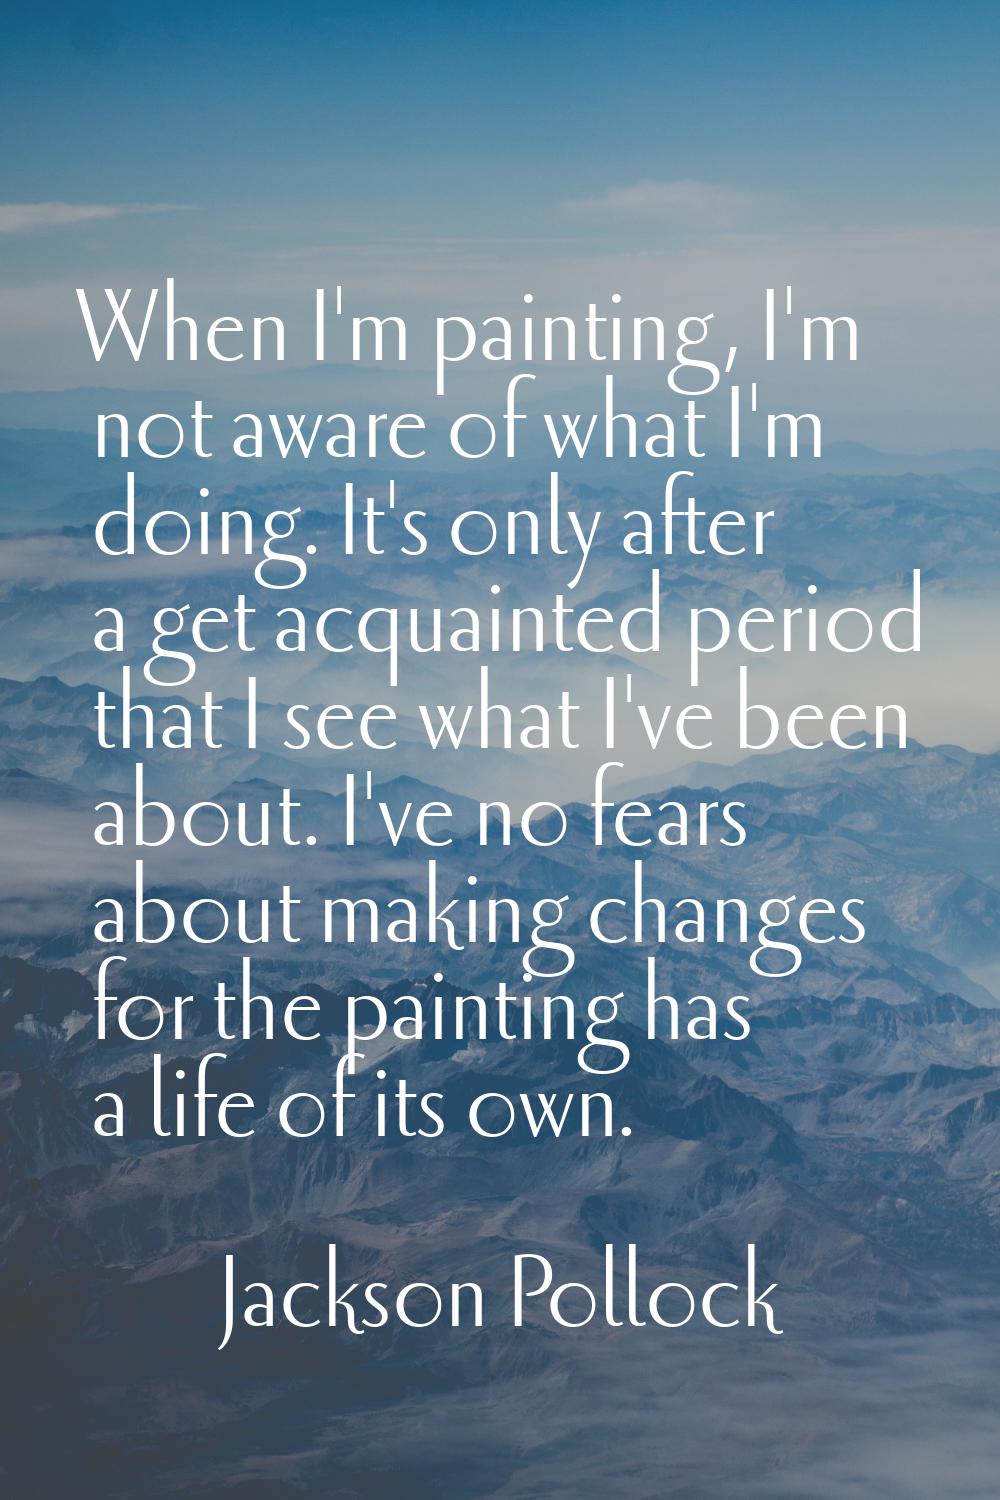 When I'm painting, I'm not aware of what I'm doing. It's only after a get acquainted period that I 